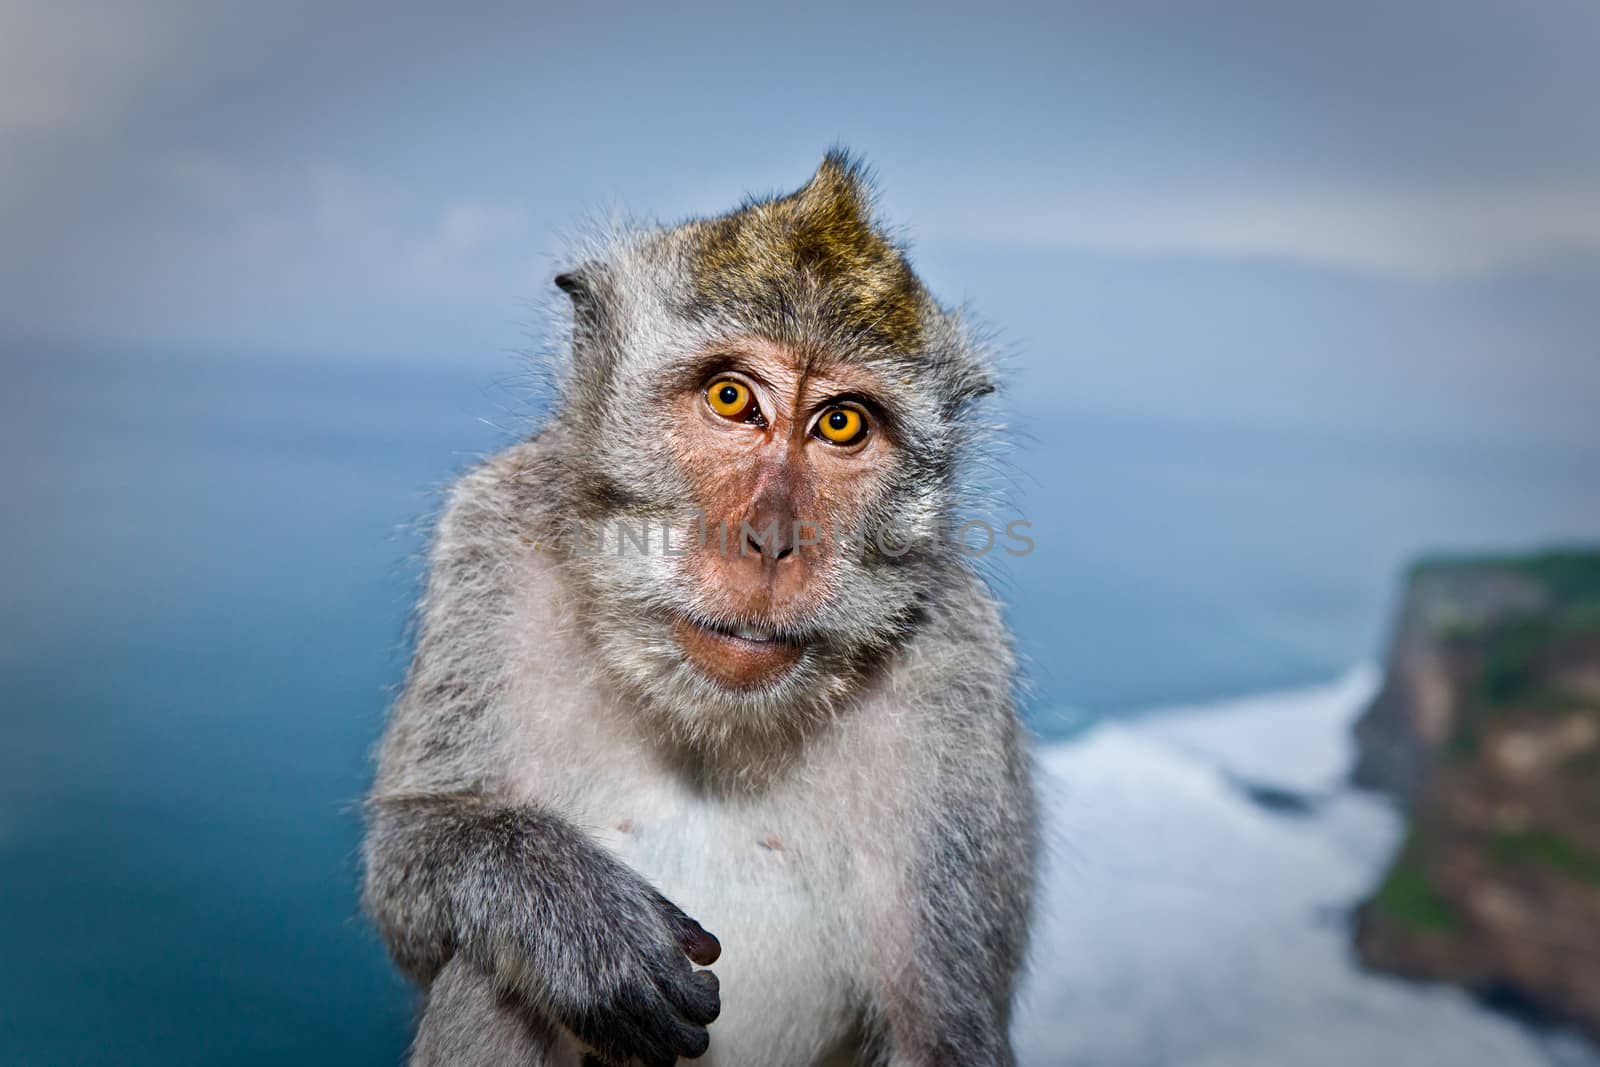 Macaque monkey by jrstock